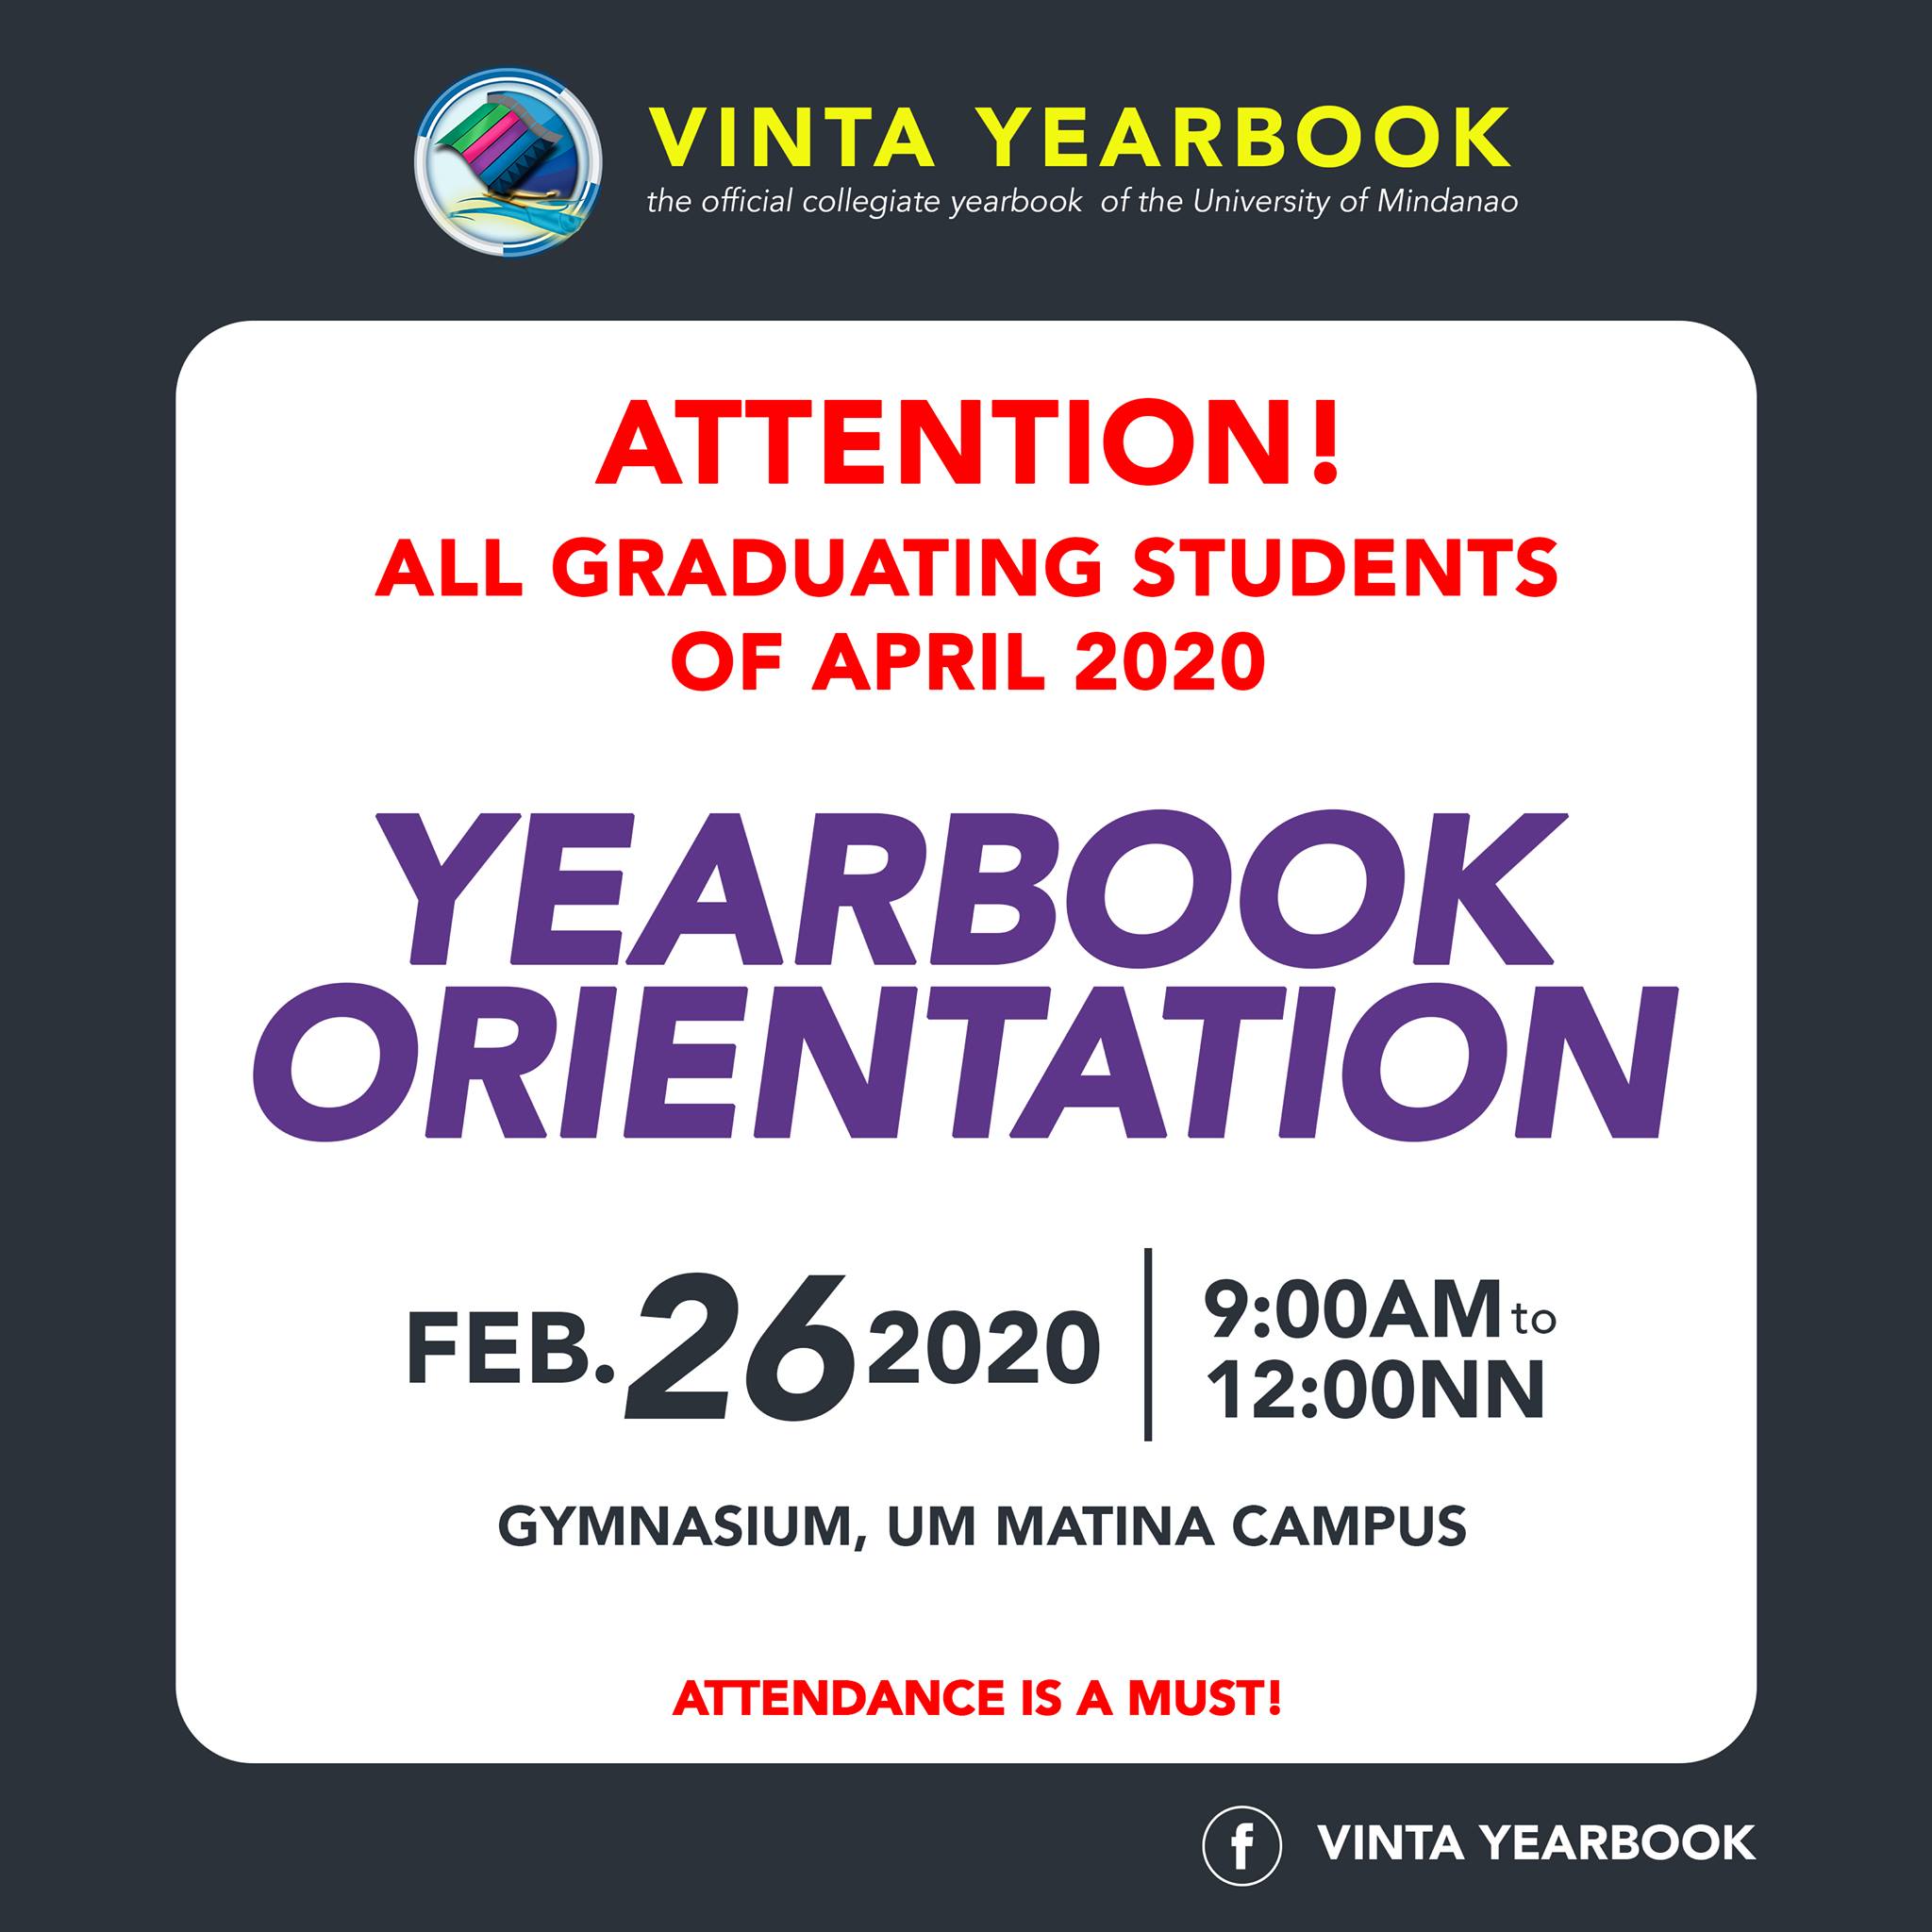 ATTENTION: Graduating students of April 2020